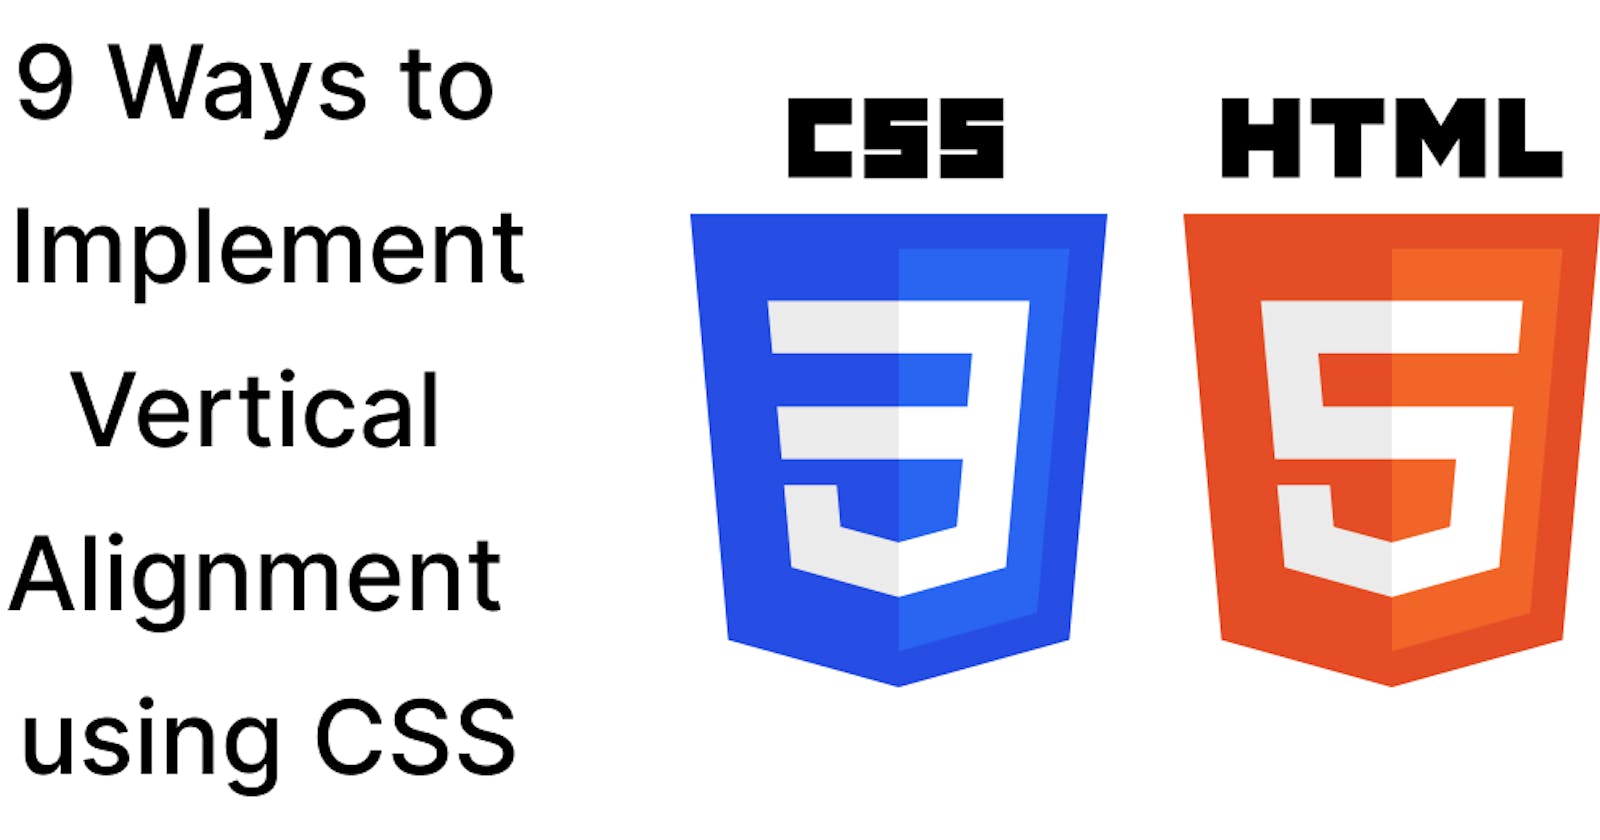 9 Ways to Implement Vertical Alignment in CSS with Examples